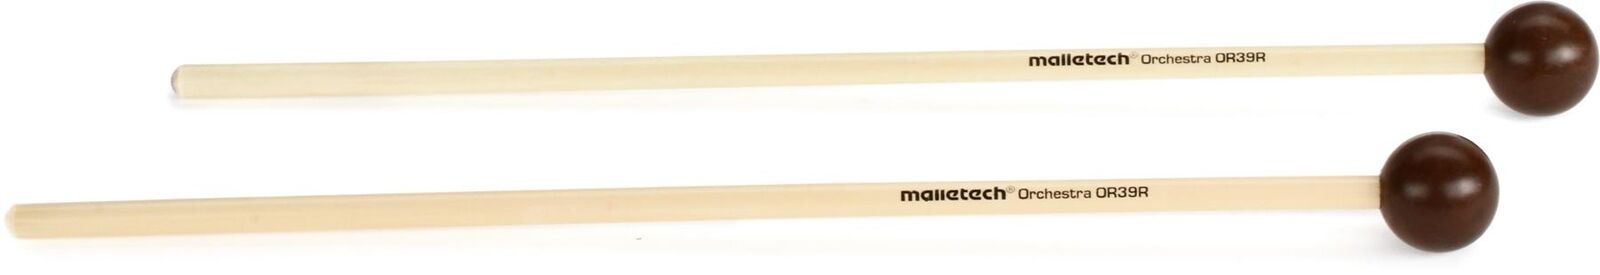 Malletech OR39R Orchestral Series Xylophone Mallets - Brown (5-pack) Bundle